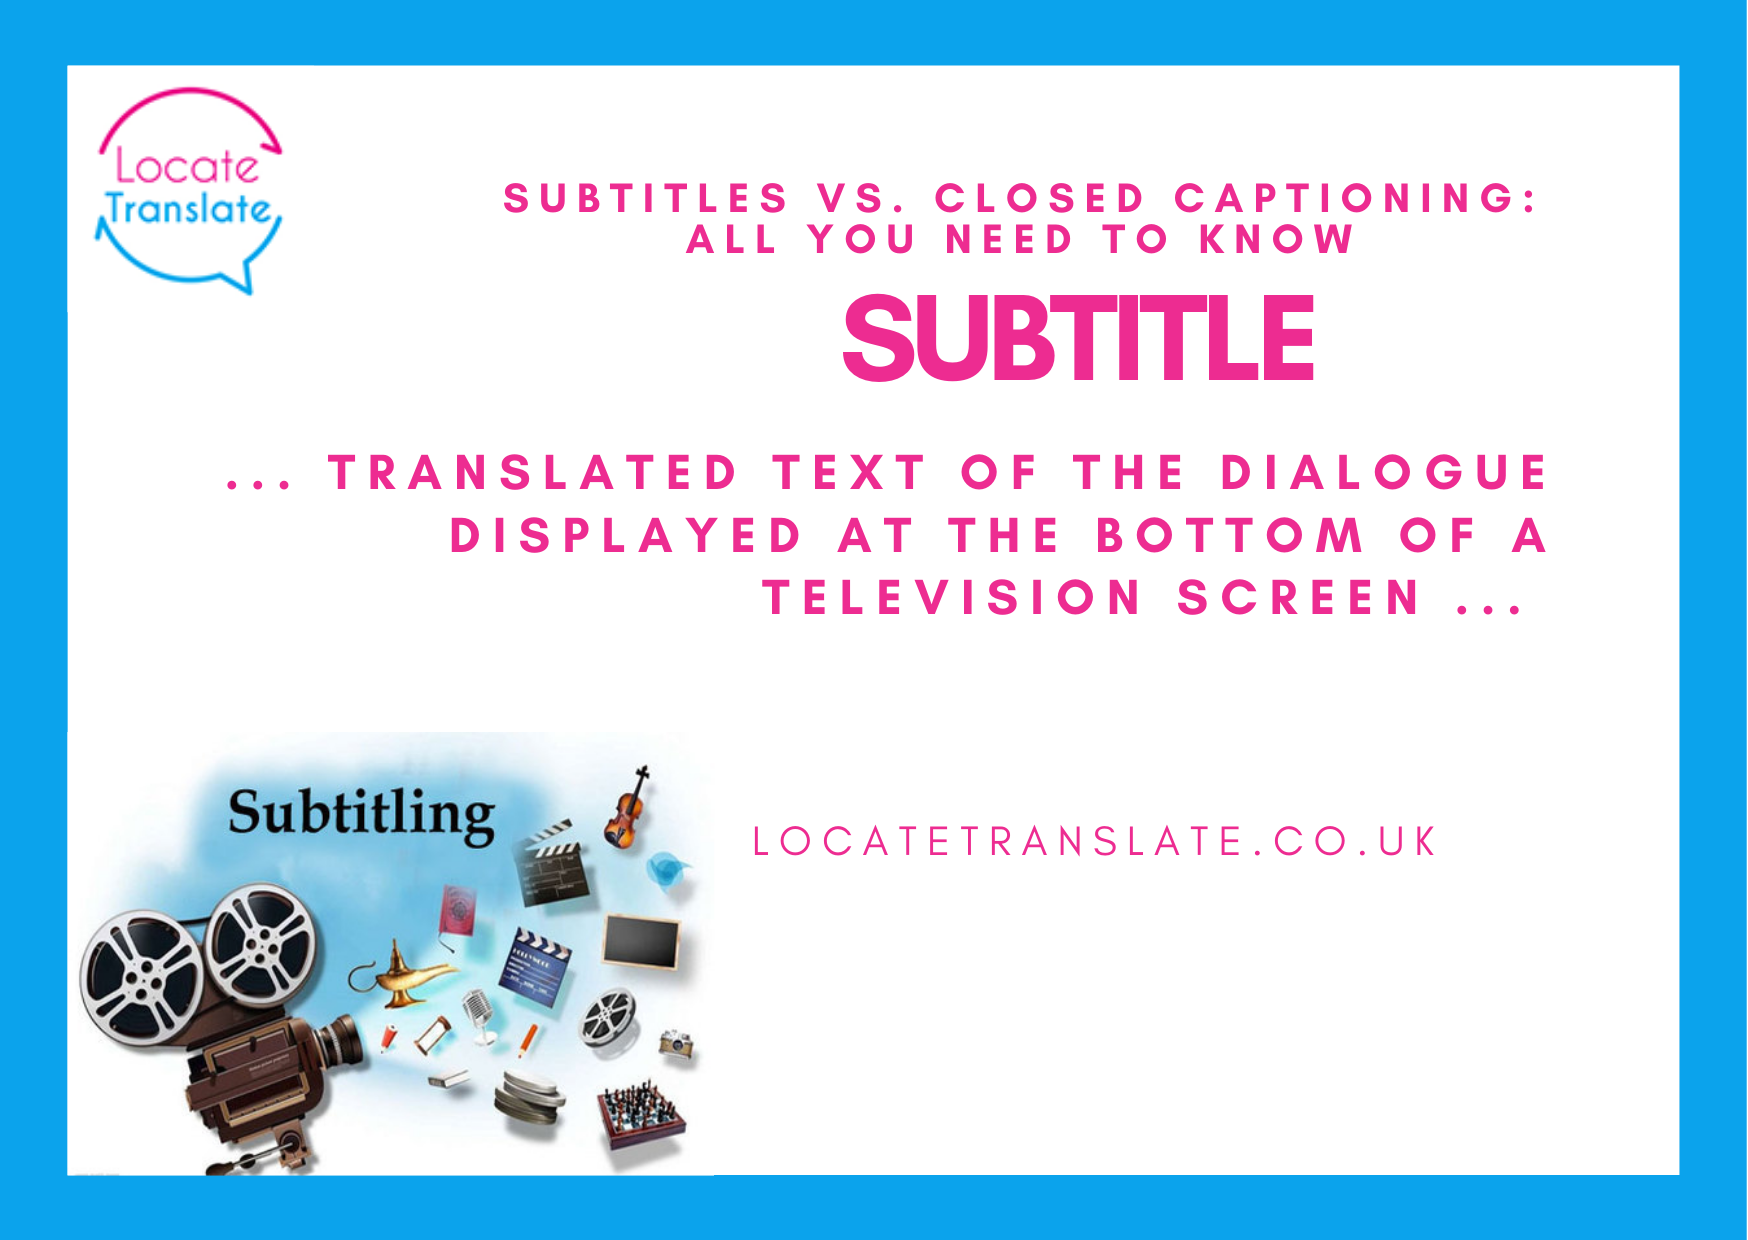 What are Subtitles?